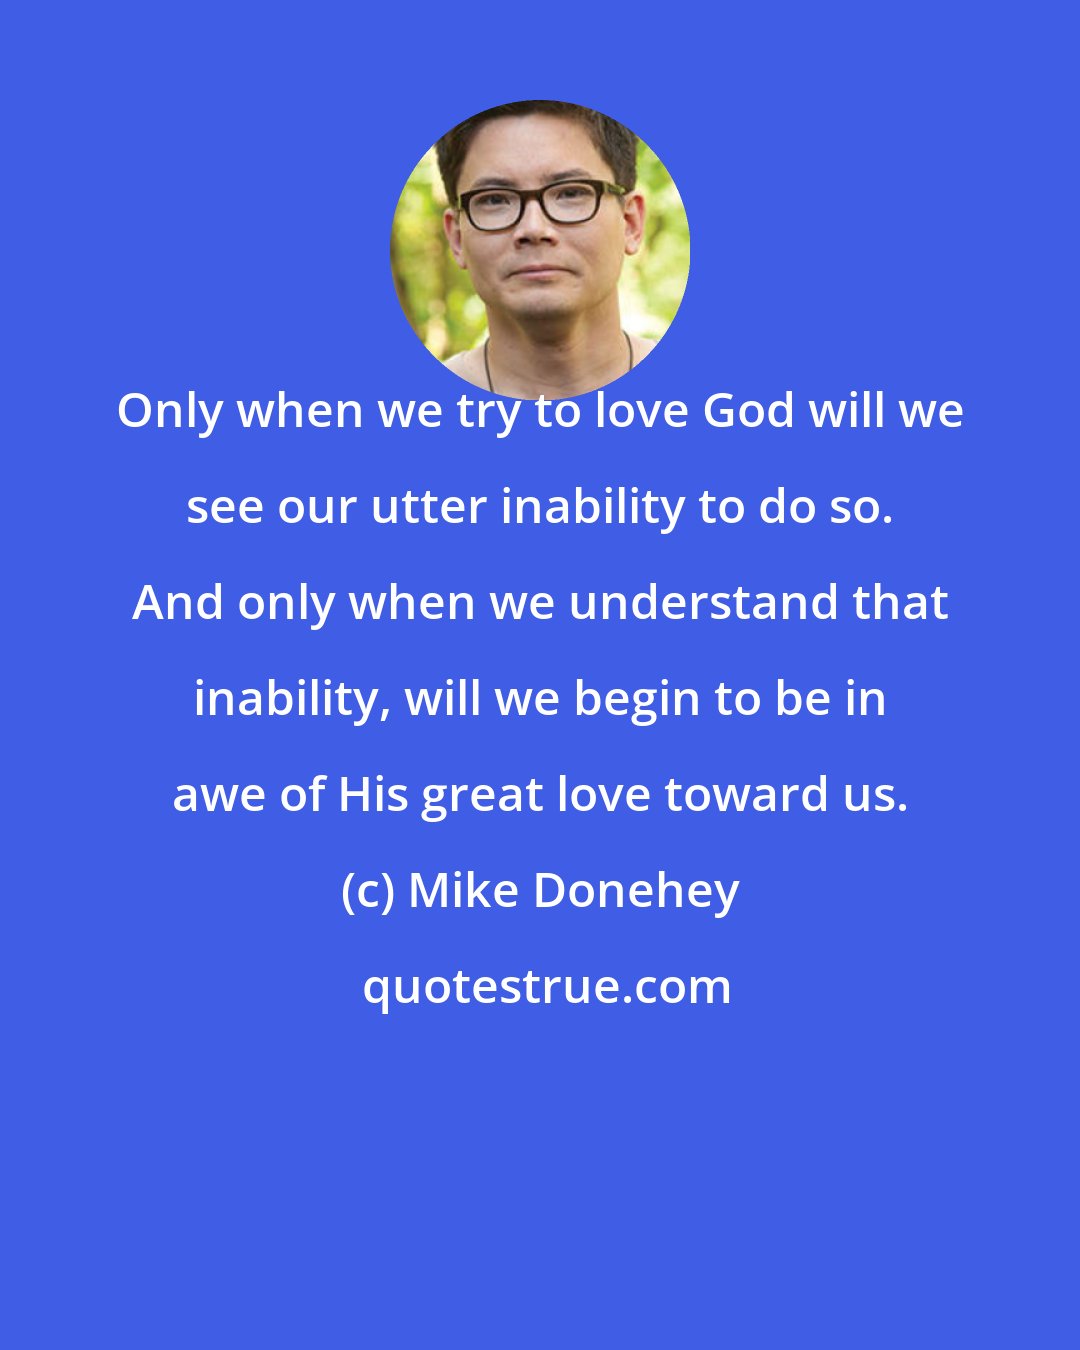 Mike Donehey: Only when we try to love God will we see our utter inability to do so. And only when we understand that inability, will we begin to be in awe of His great love toward us.